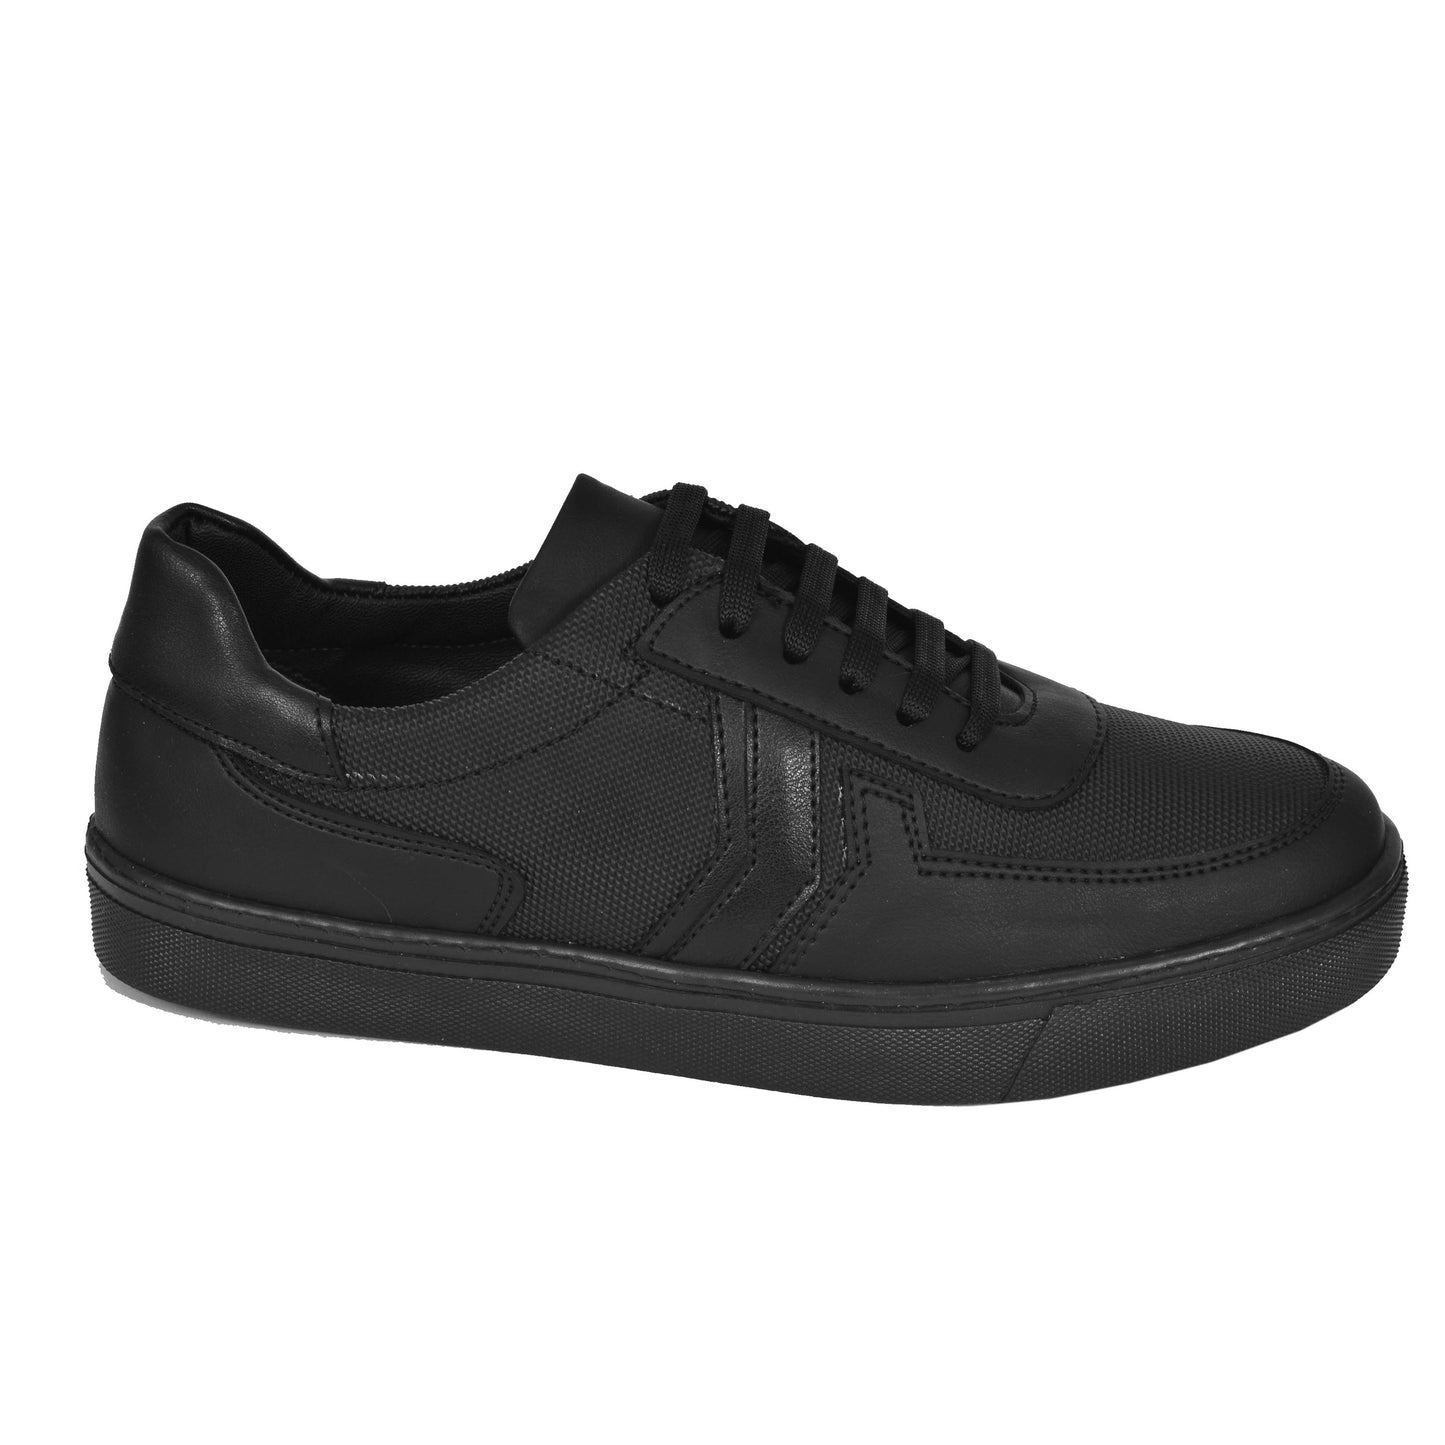 2H #9508 Black Casual Shoes